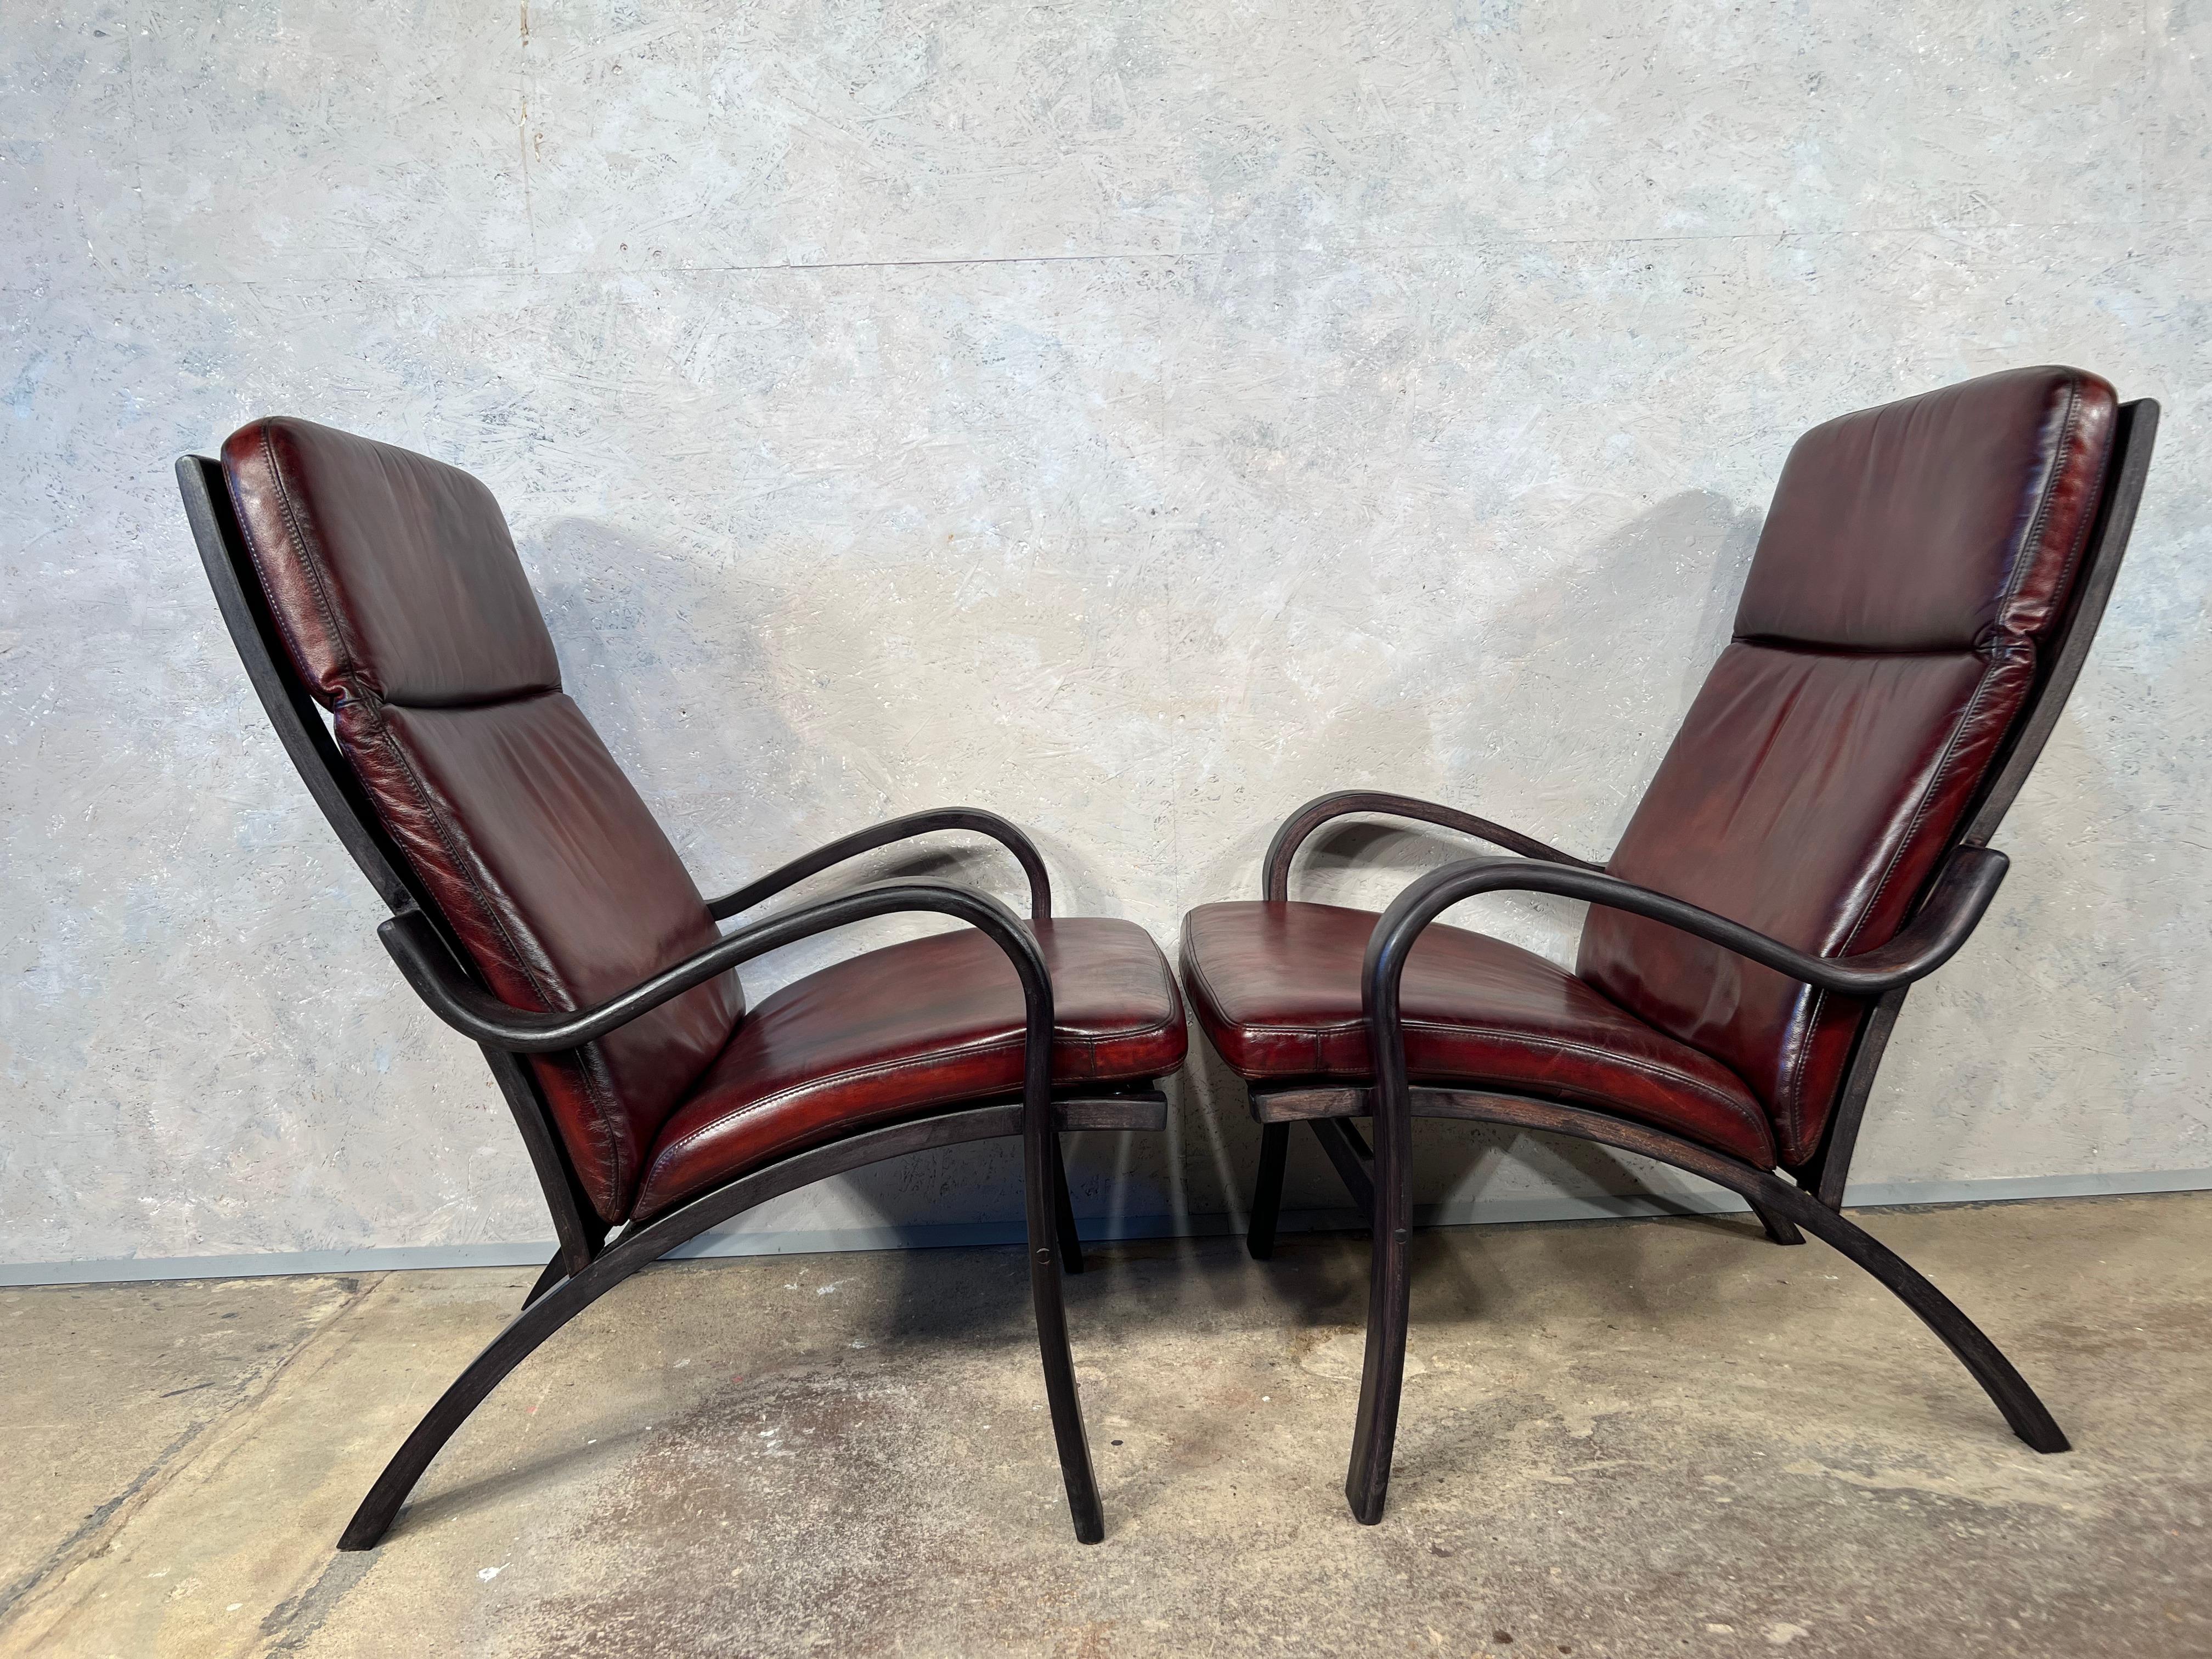 Stunning Pair of Vintage Danish Bentwood Leather Chairs 70s Retro #418 In Good Condition For Sale In Lewes, GB